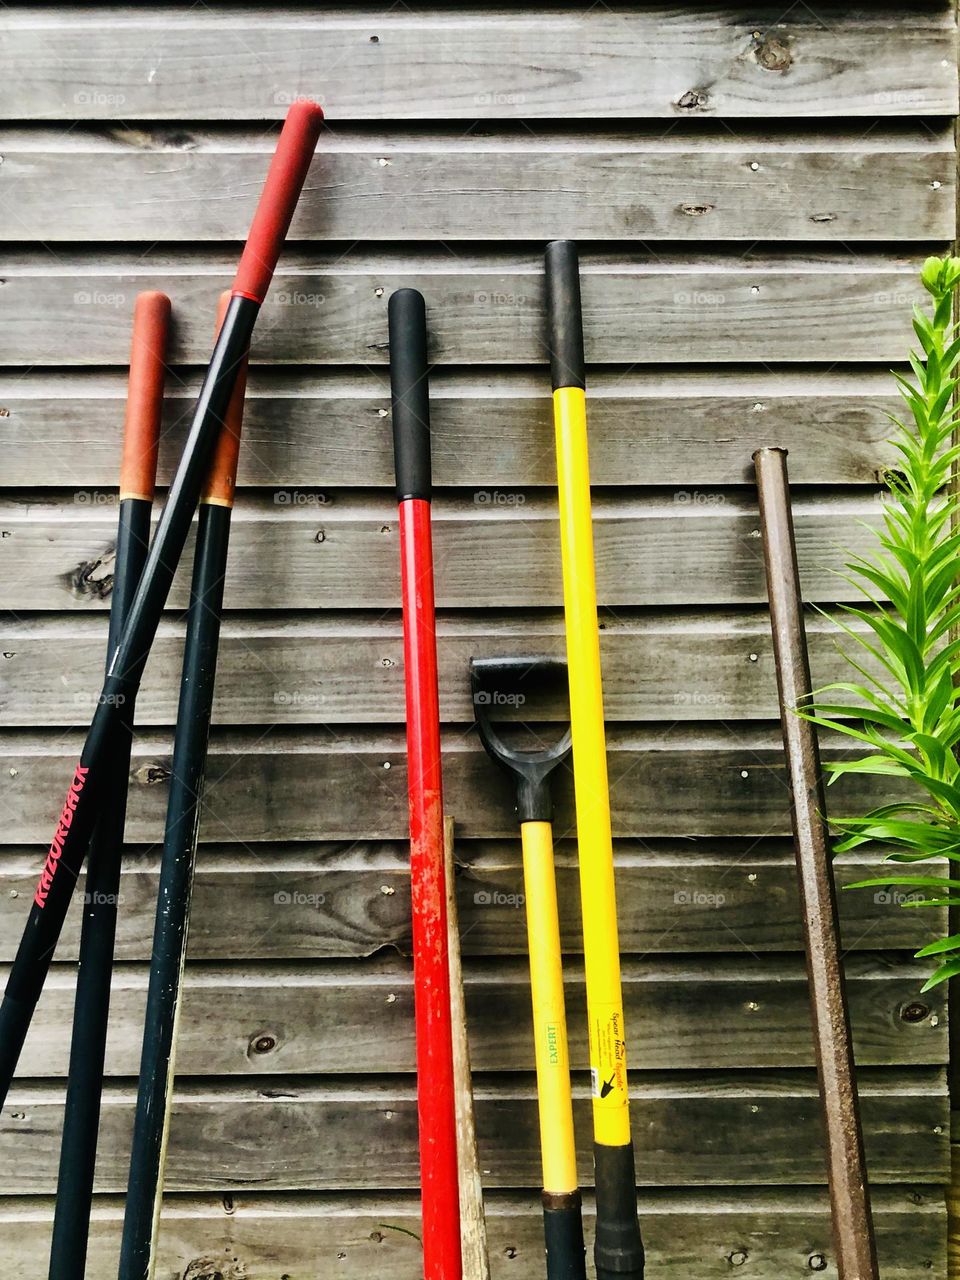 Shovels and other tools leaning against wooden siding. A green plant on the right cues that it’s time to garden.